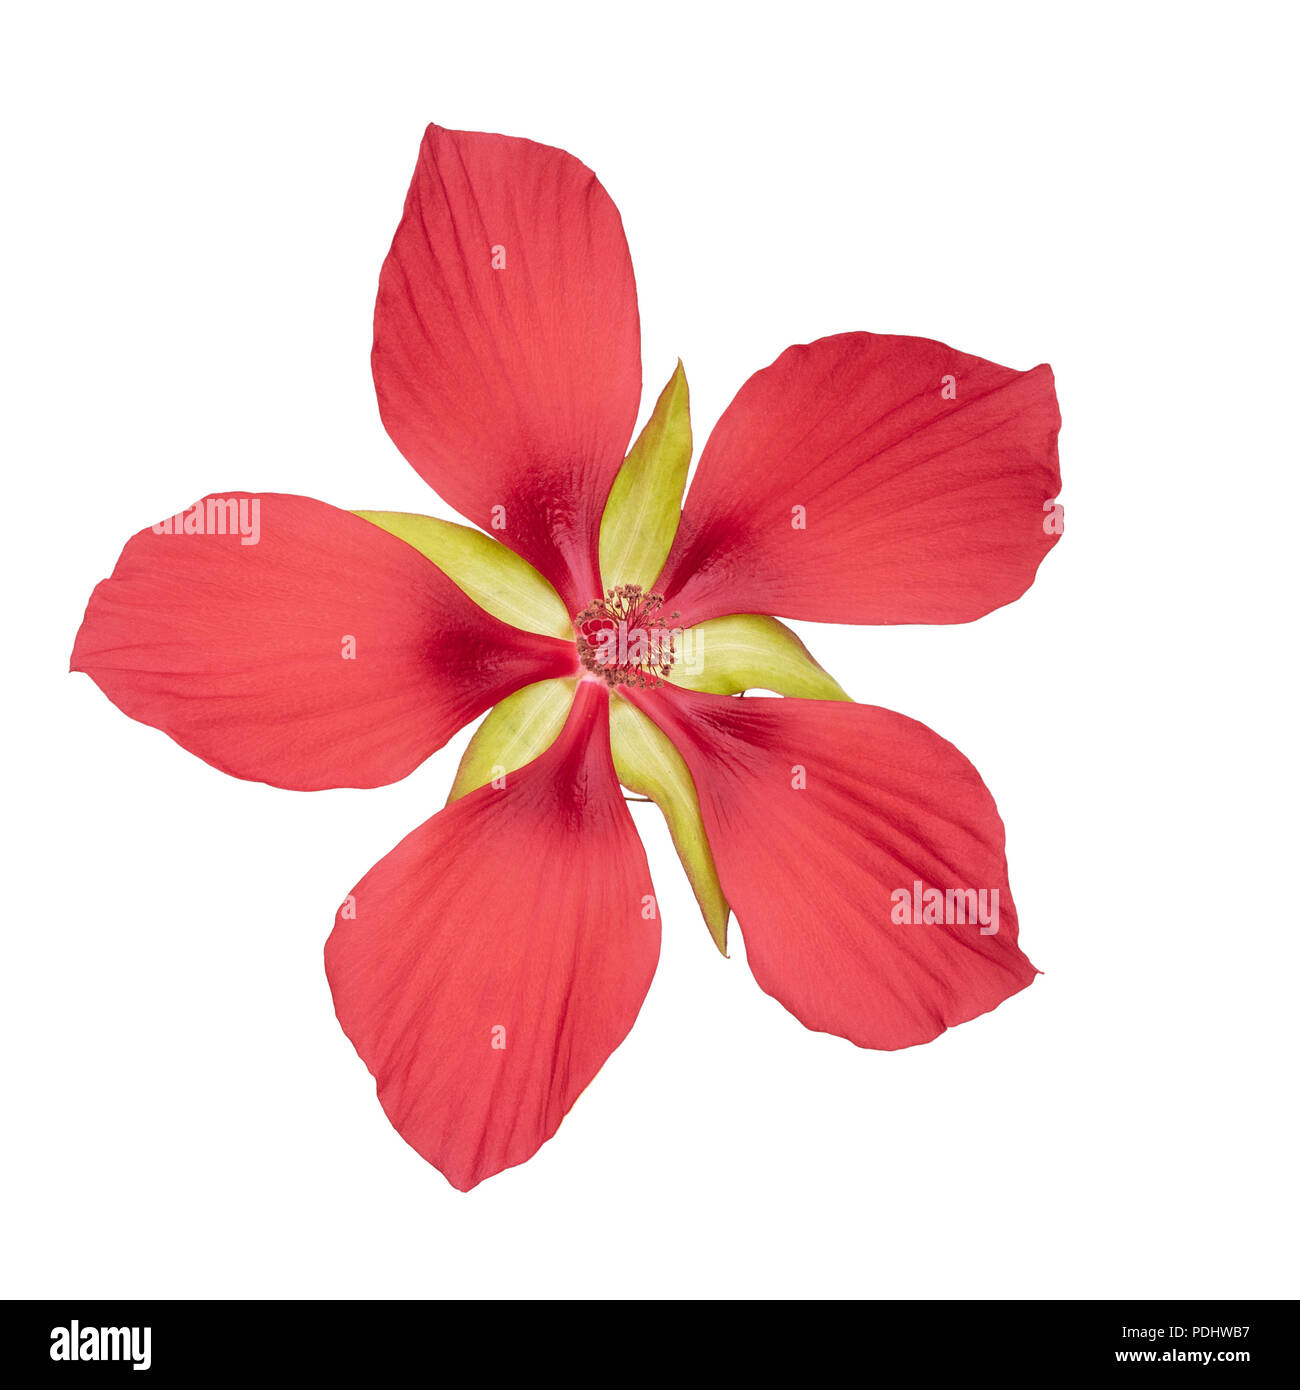 Hibiscus coccineus or scarlet rosemallow, huge, exuberant red flower isolated on white. Aka Texas star, brilliant or scarlet hibiscuss. Stock Photo